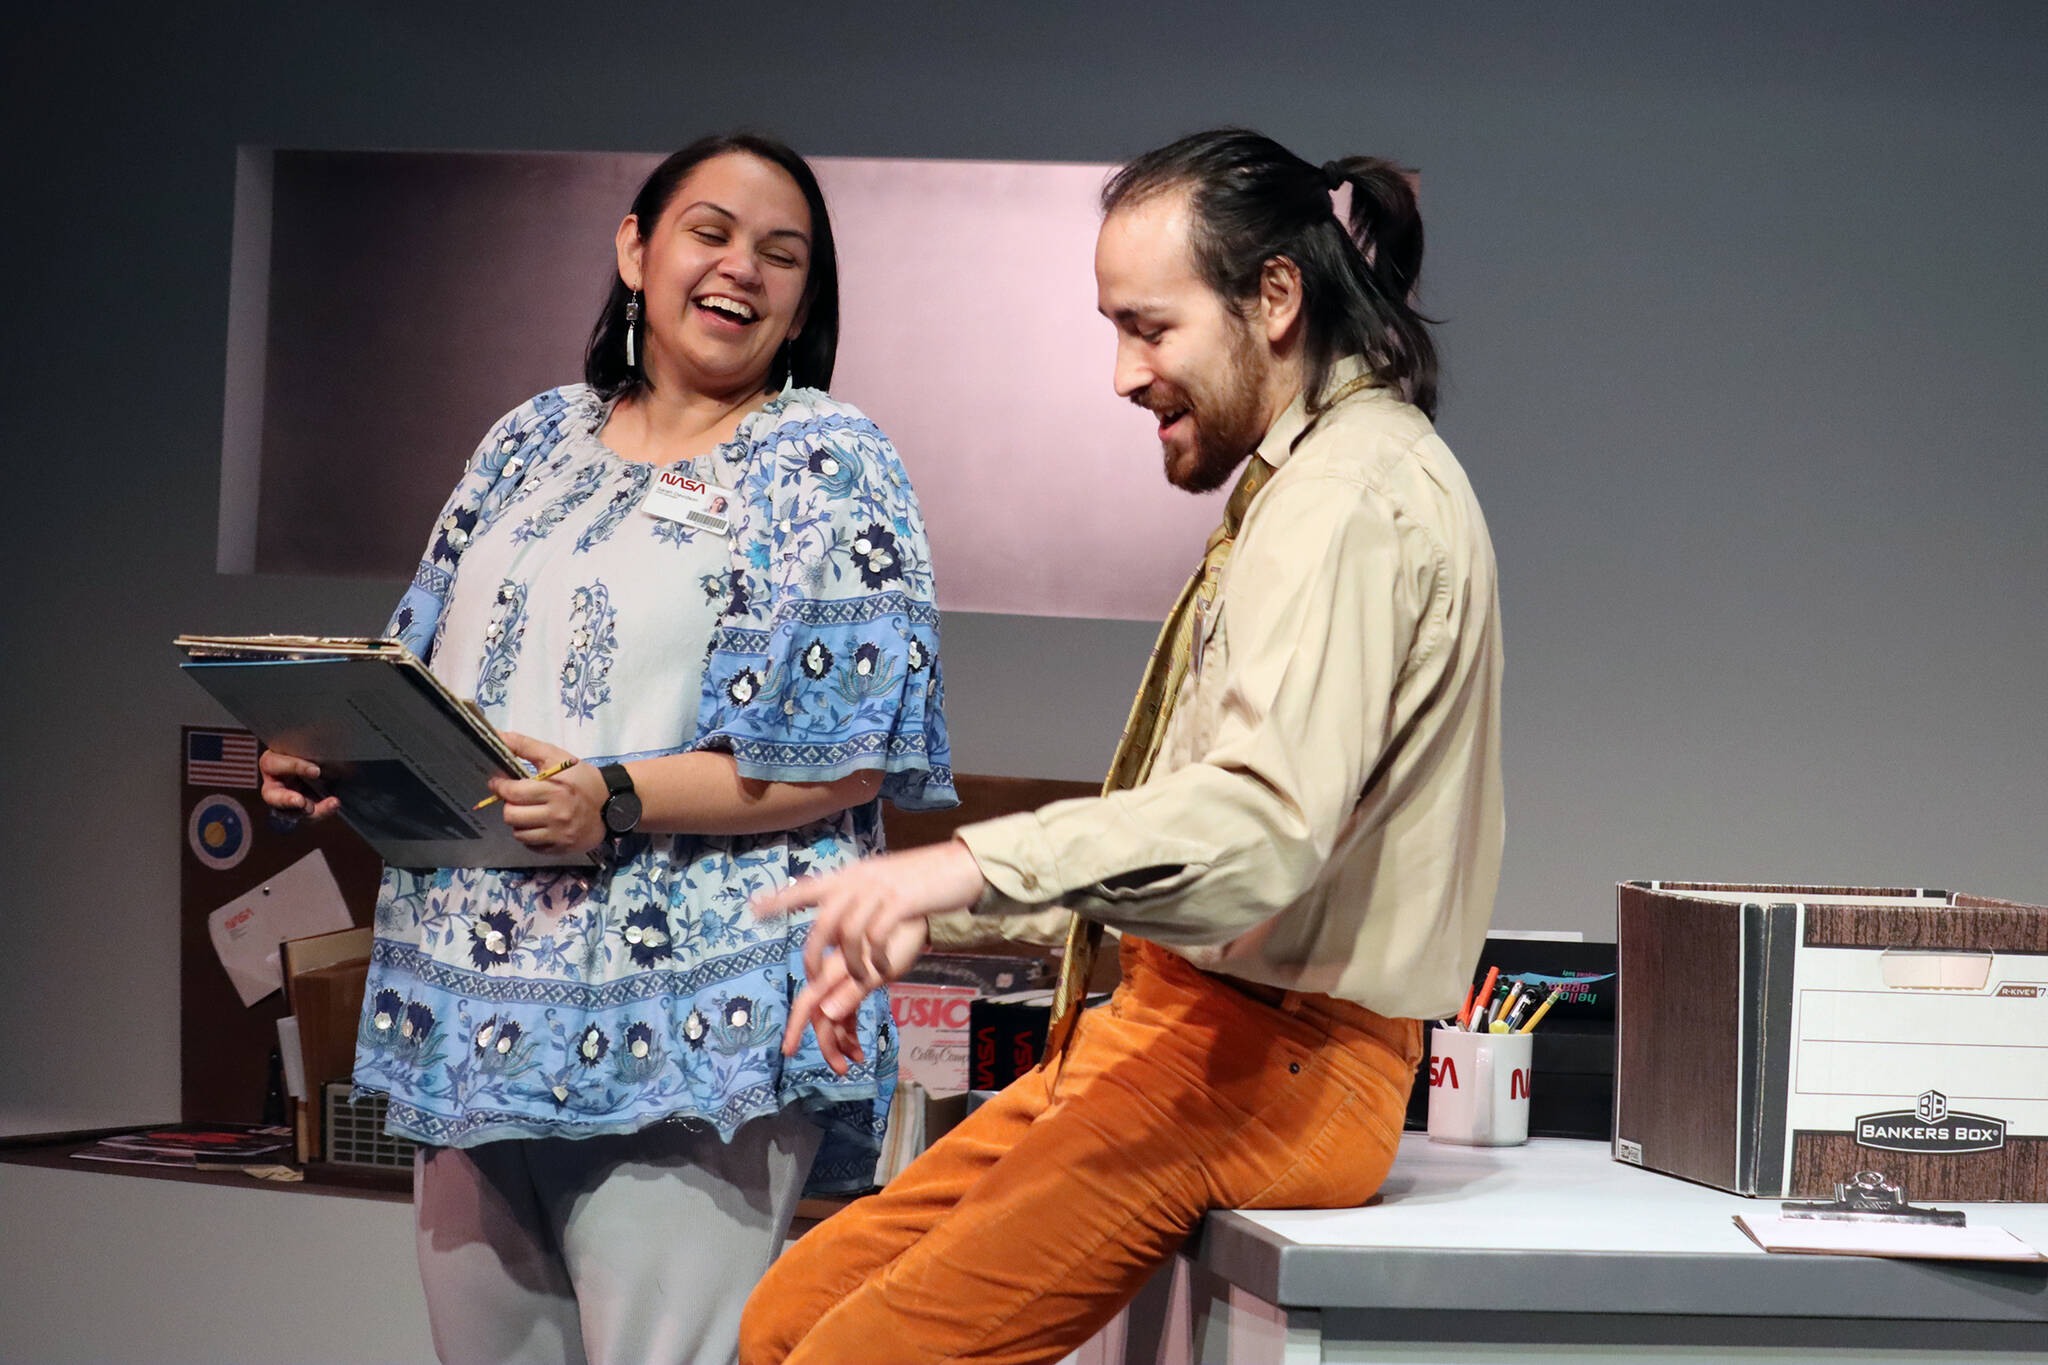 Sarah (Erin Tripp) and Carl (Jared Olin) laugh while working on the Voyager project during a dress rehearsal for Perseverance Theatre’s “Voyager One.” The play, which is running now, is simultaneously two period pieces. One is set in the ’70s, the other is in the distant future. (Ben Hohenstatt / Juneau Empire)